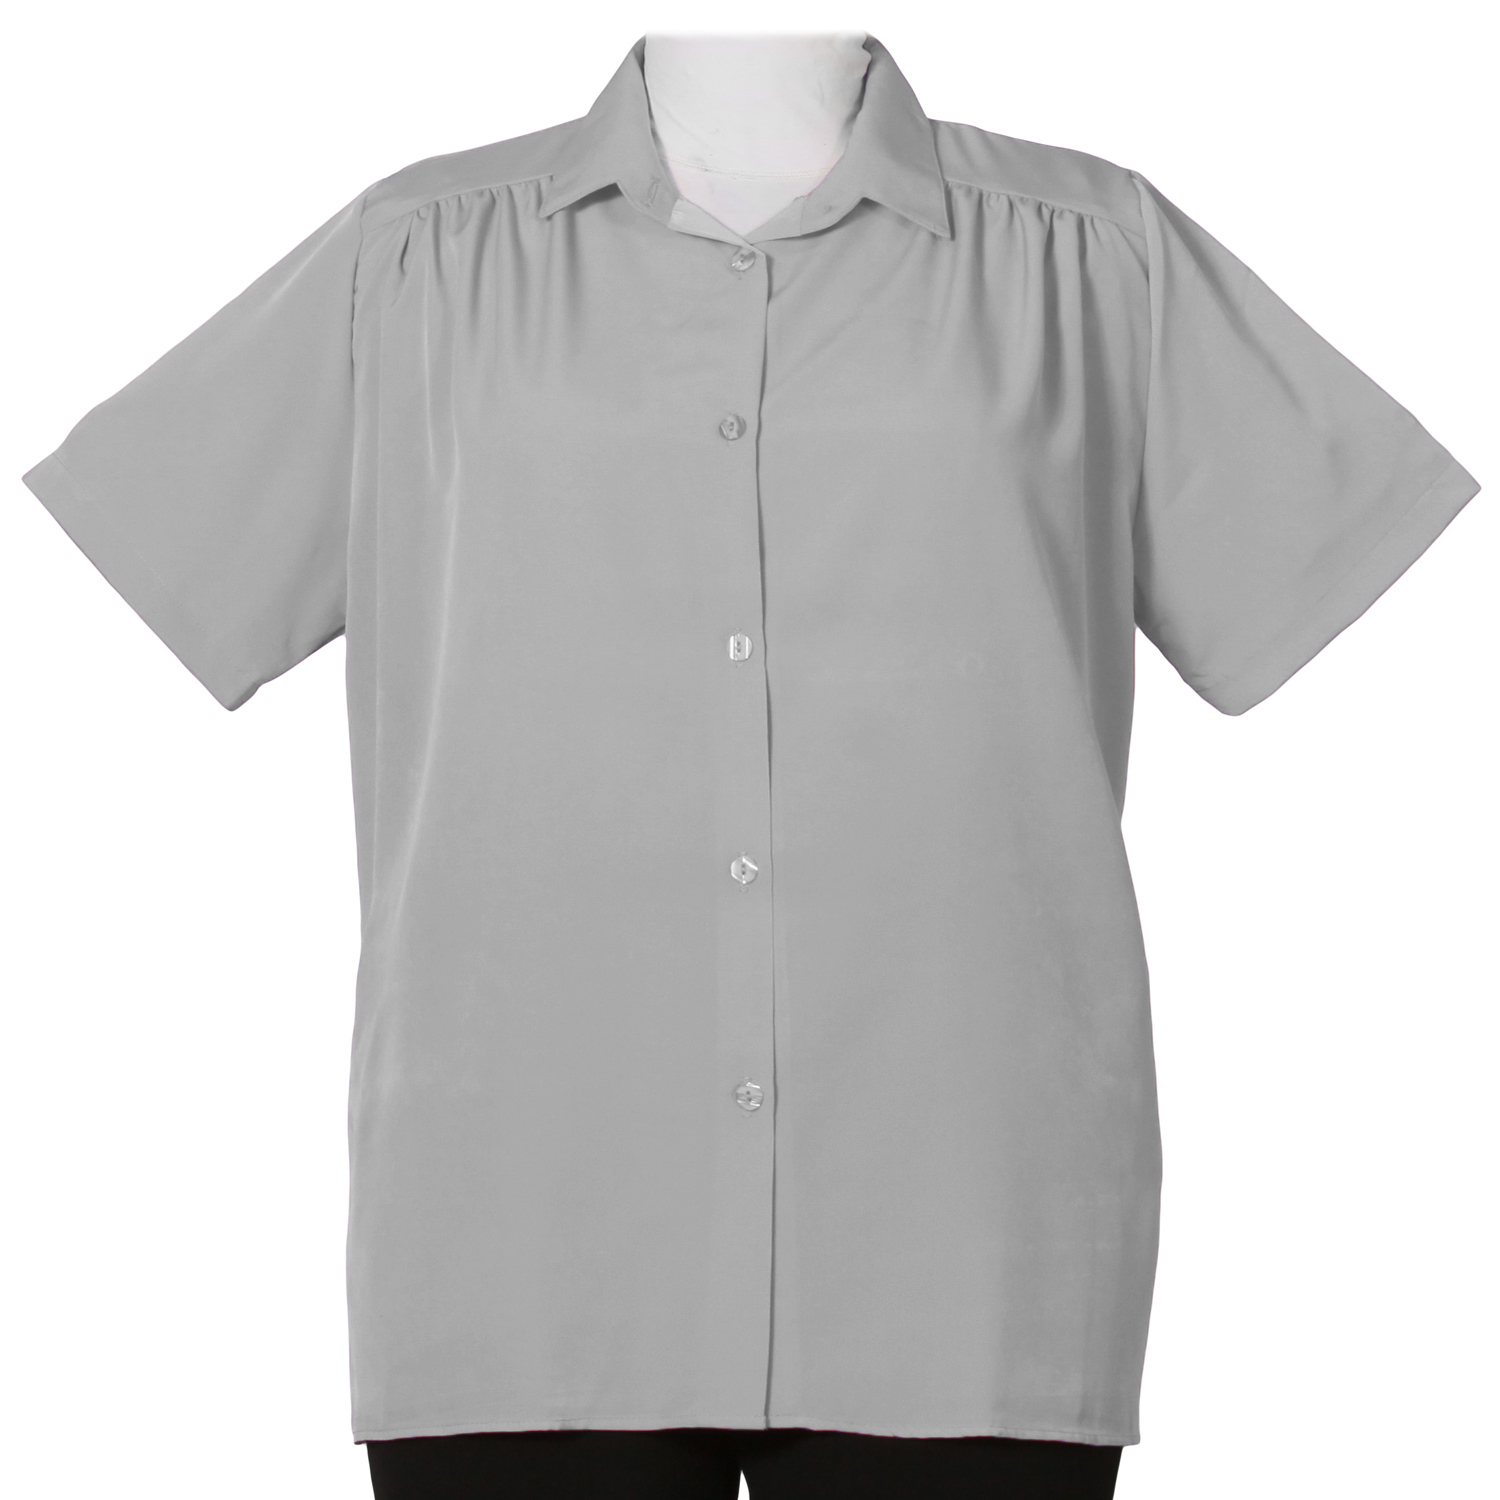 A Personal Touch Grey Women's Plus Size Blouse